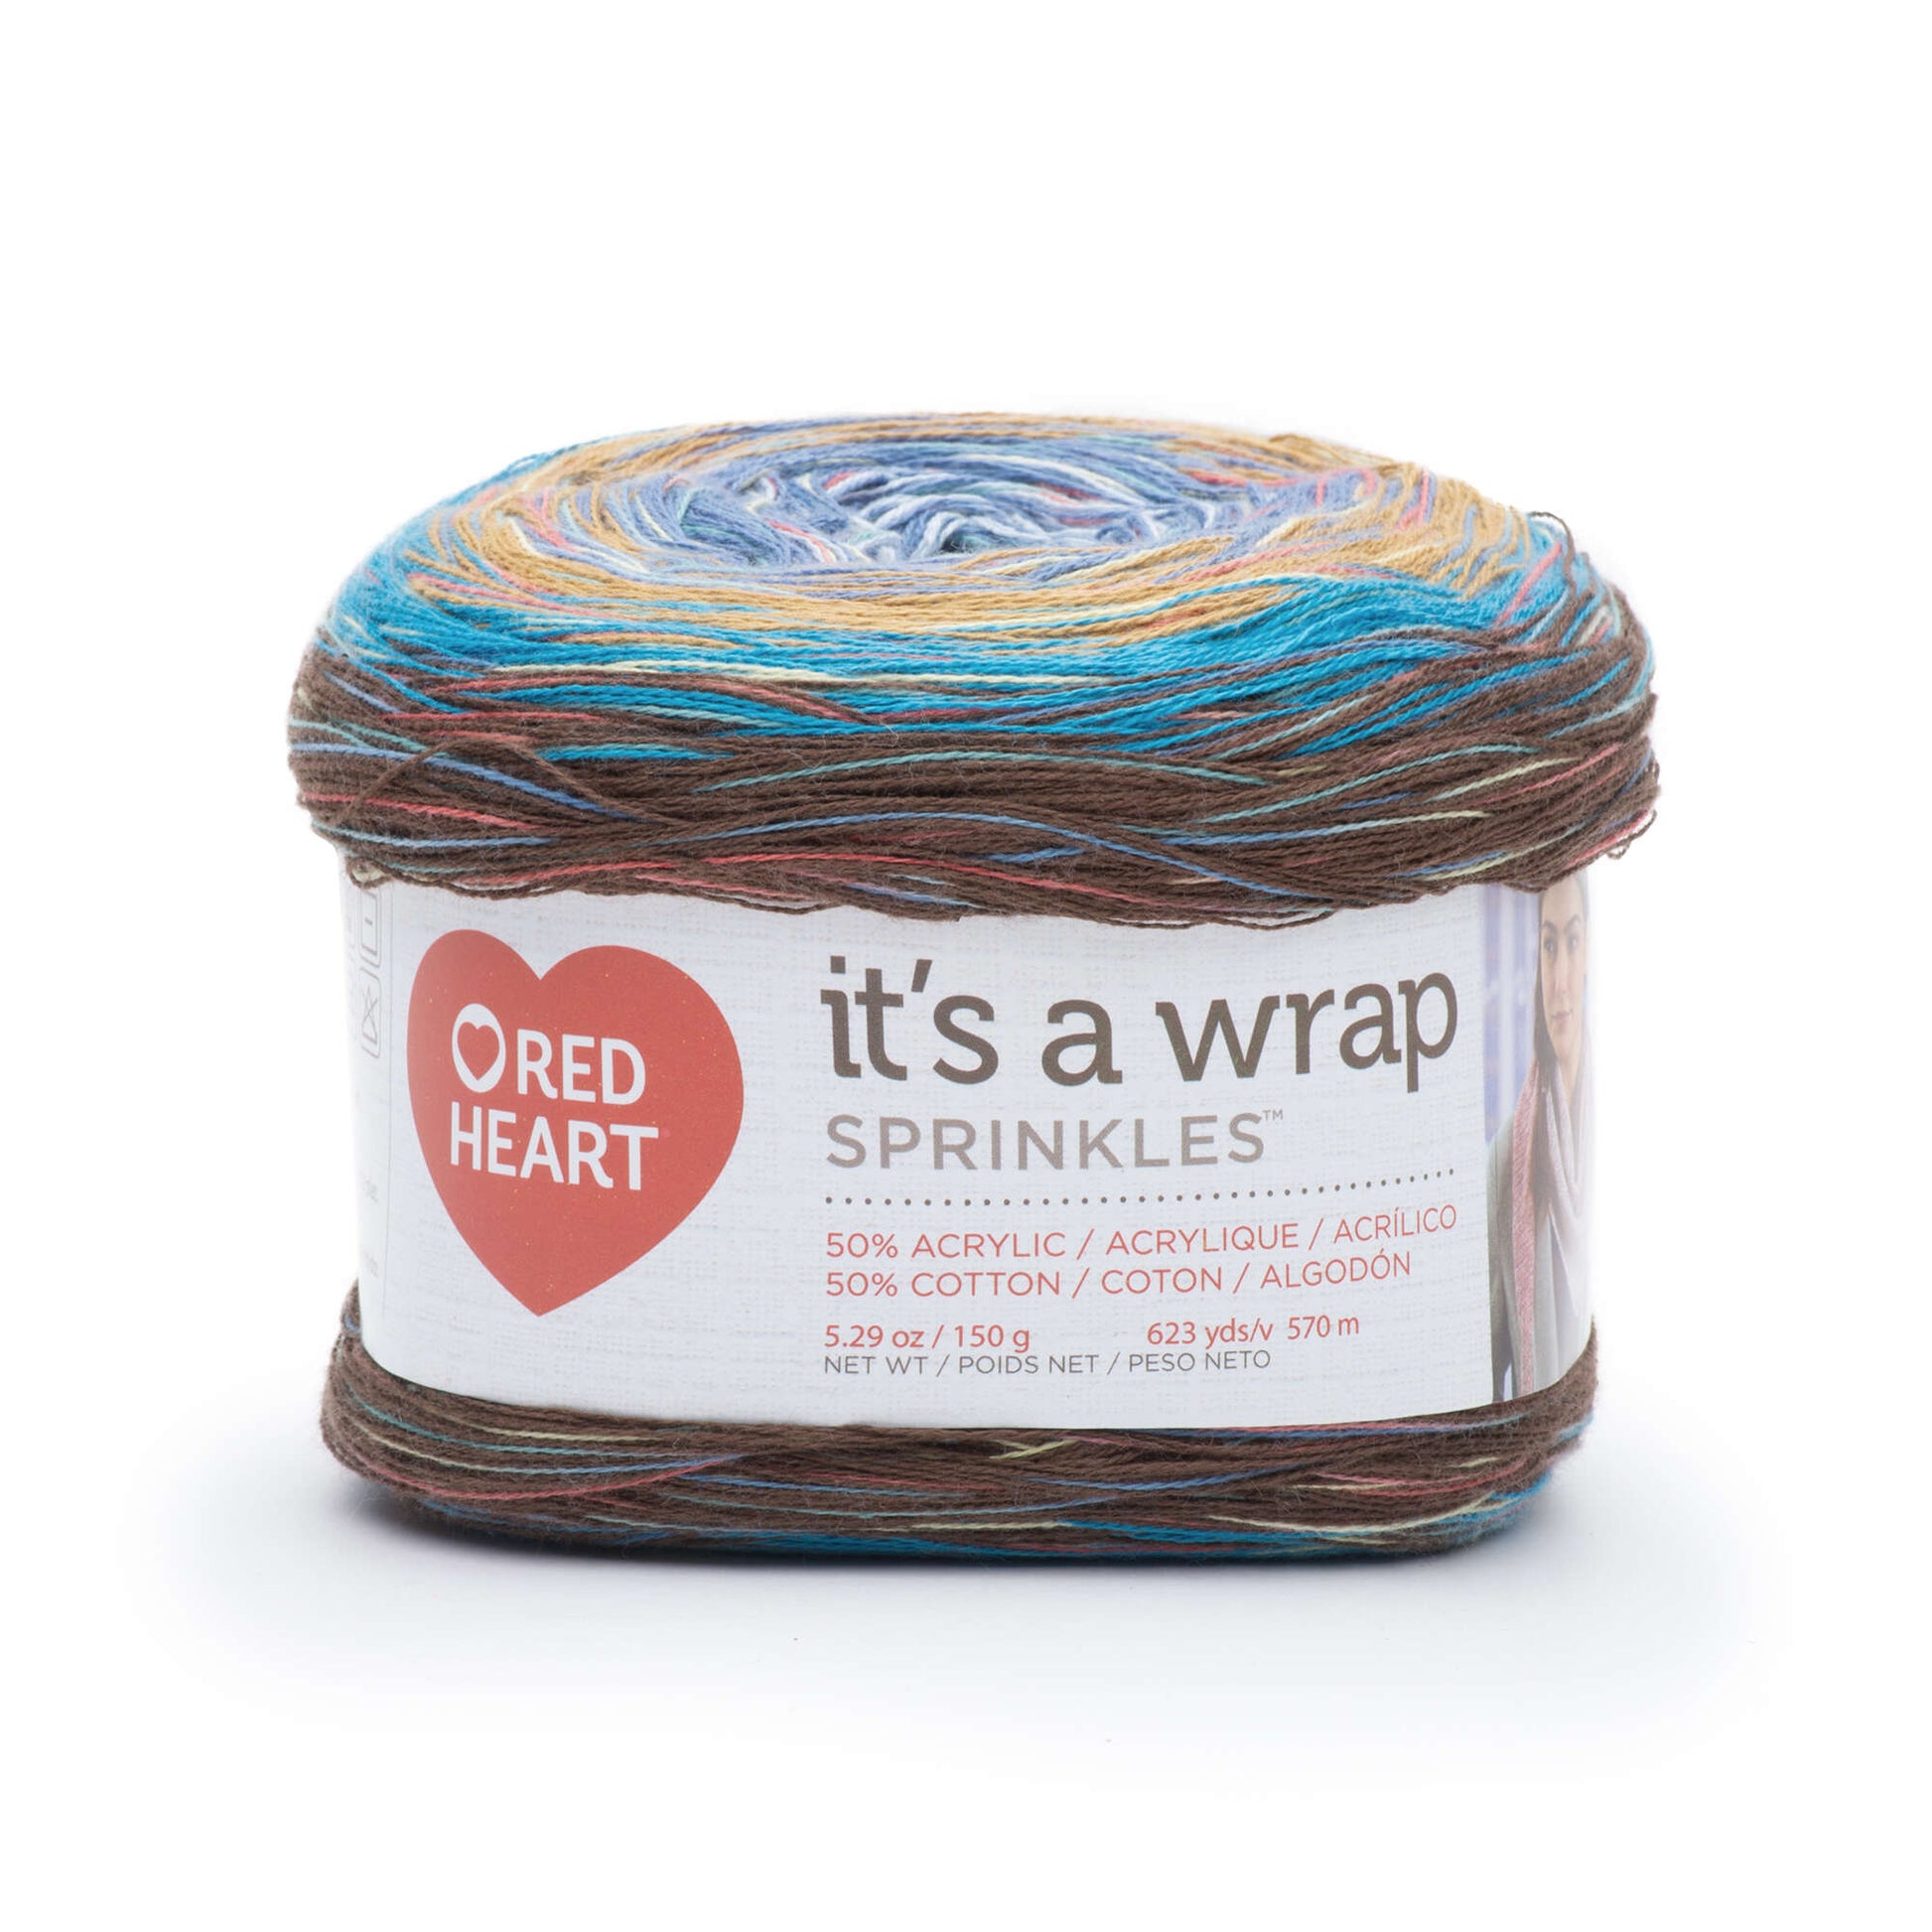 Red Heart It's a Wrap Sprinkles Yarn - Discontinued shades